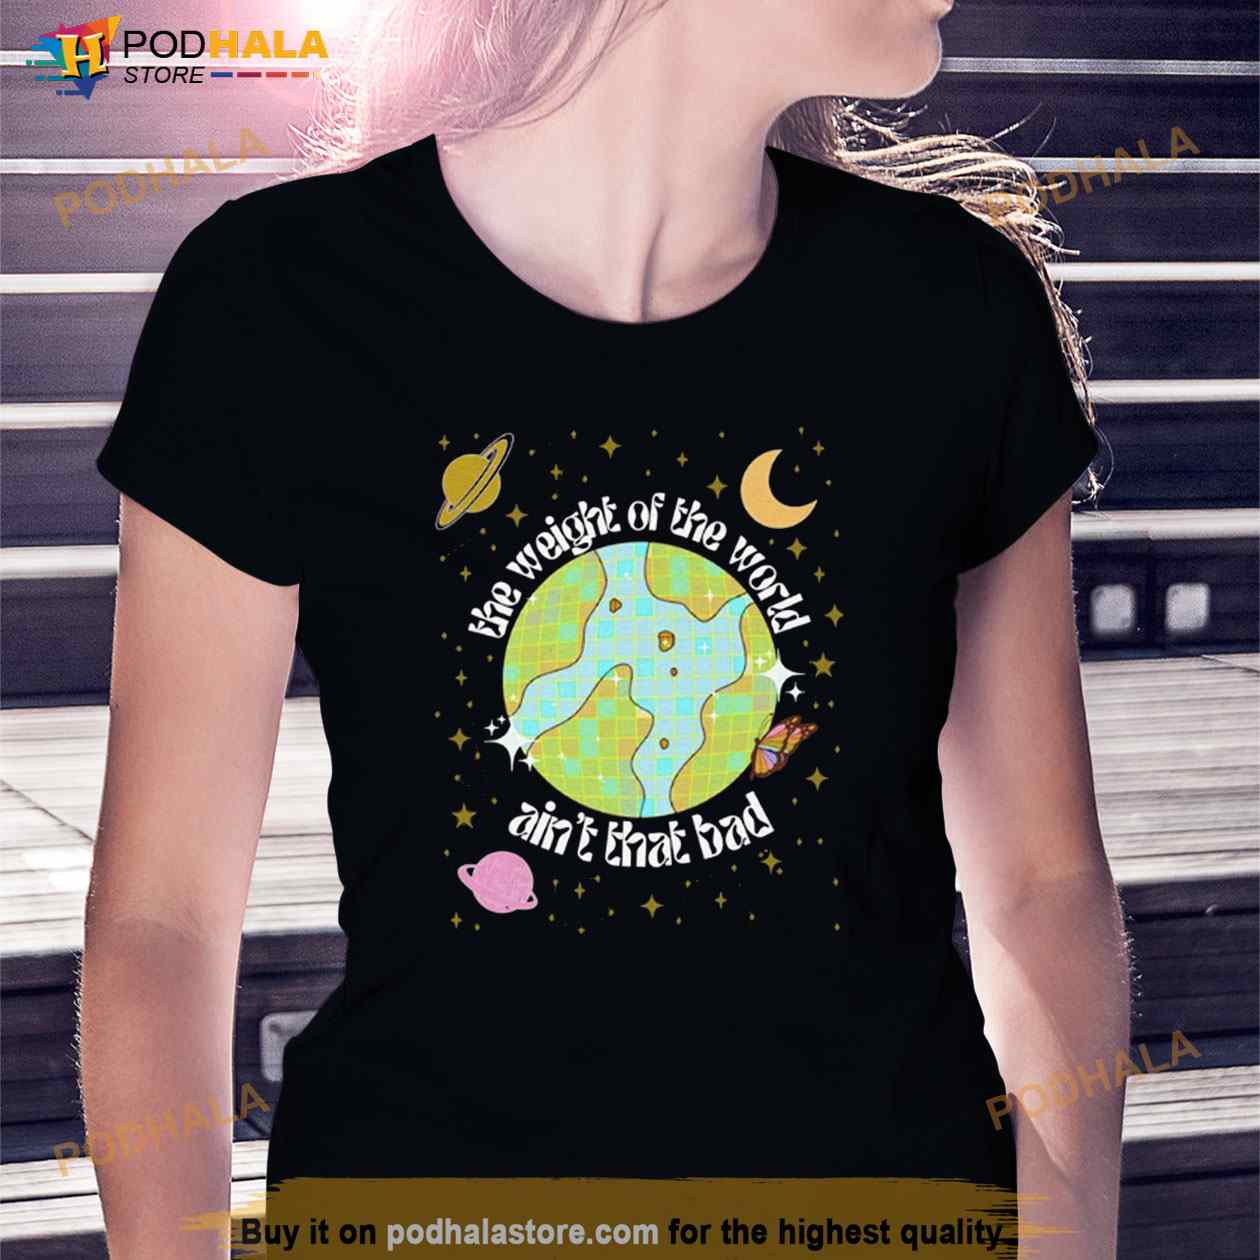 Quality Time Designs Co That’s A Horrible Idea What Time- Funny T-Shirt Unisex M / Heather Prism Lilac